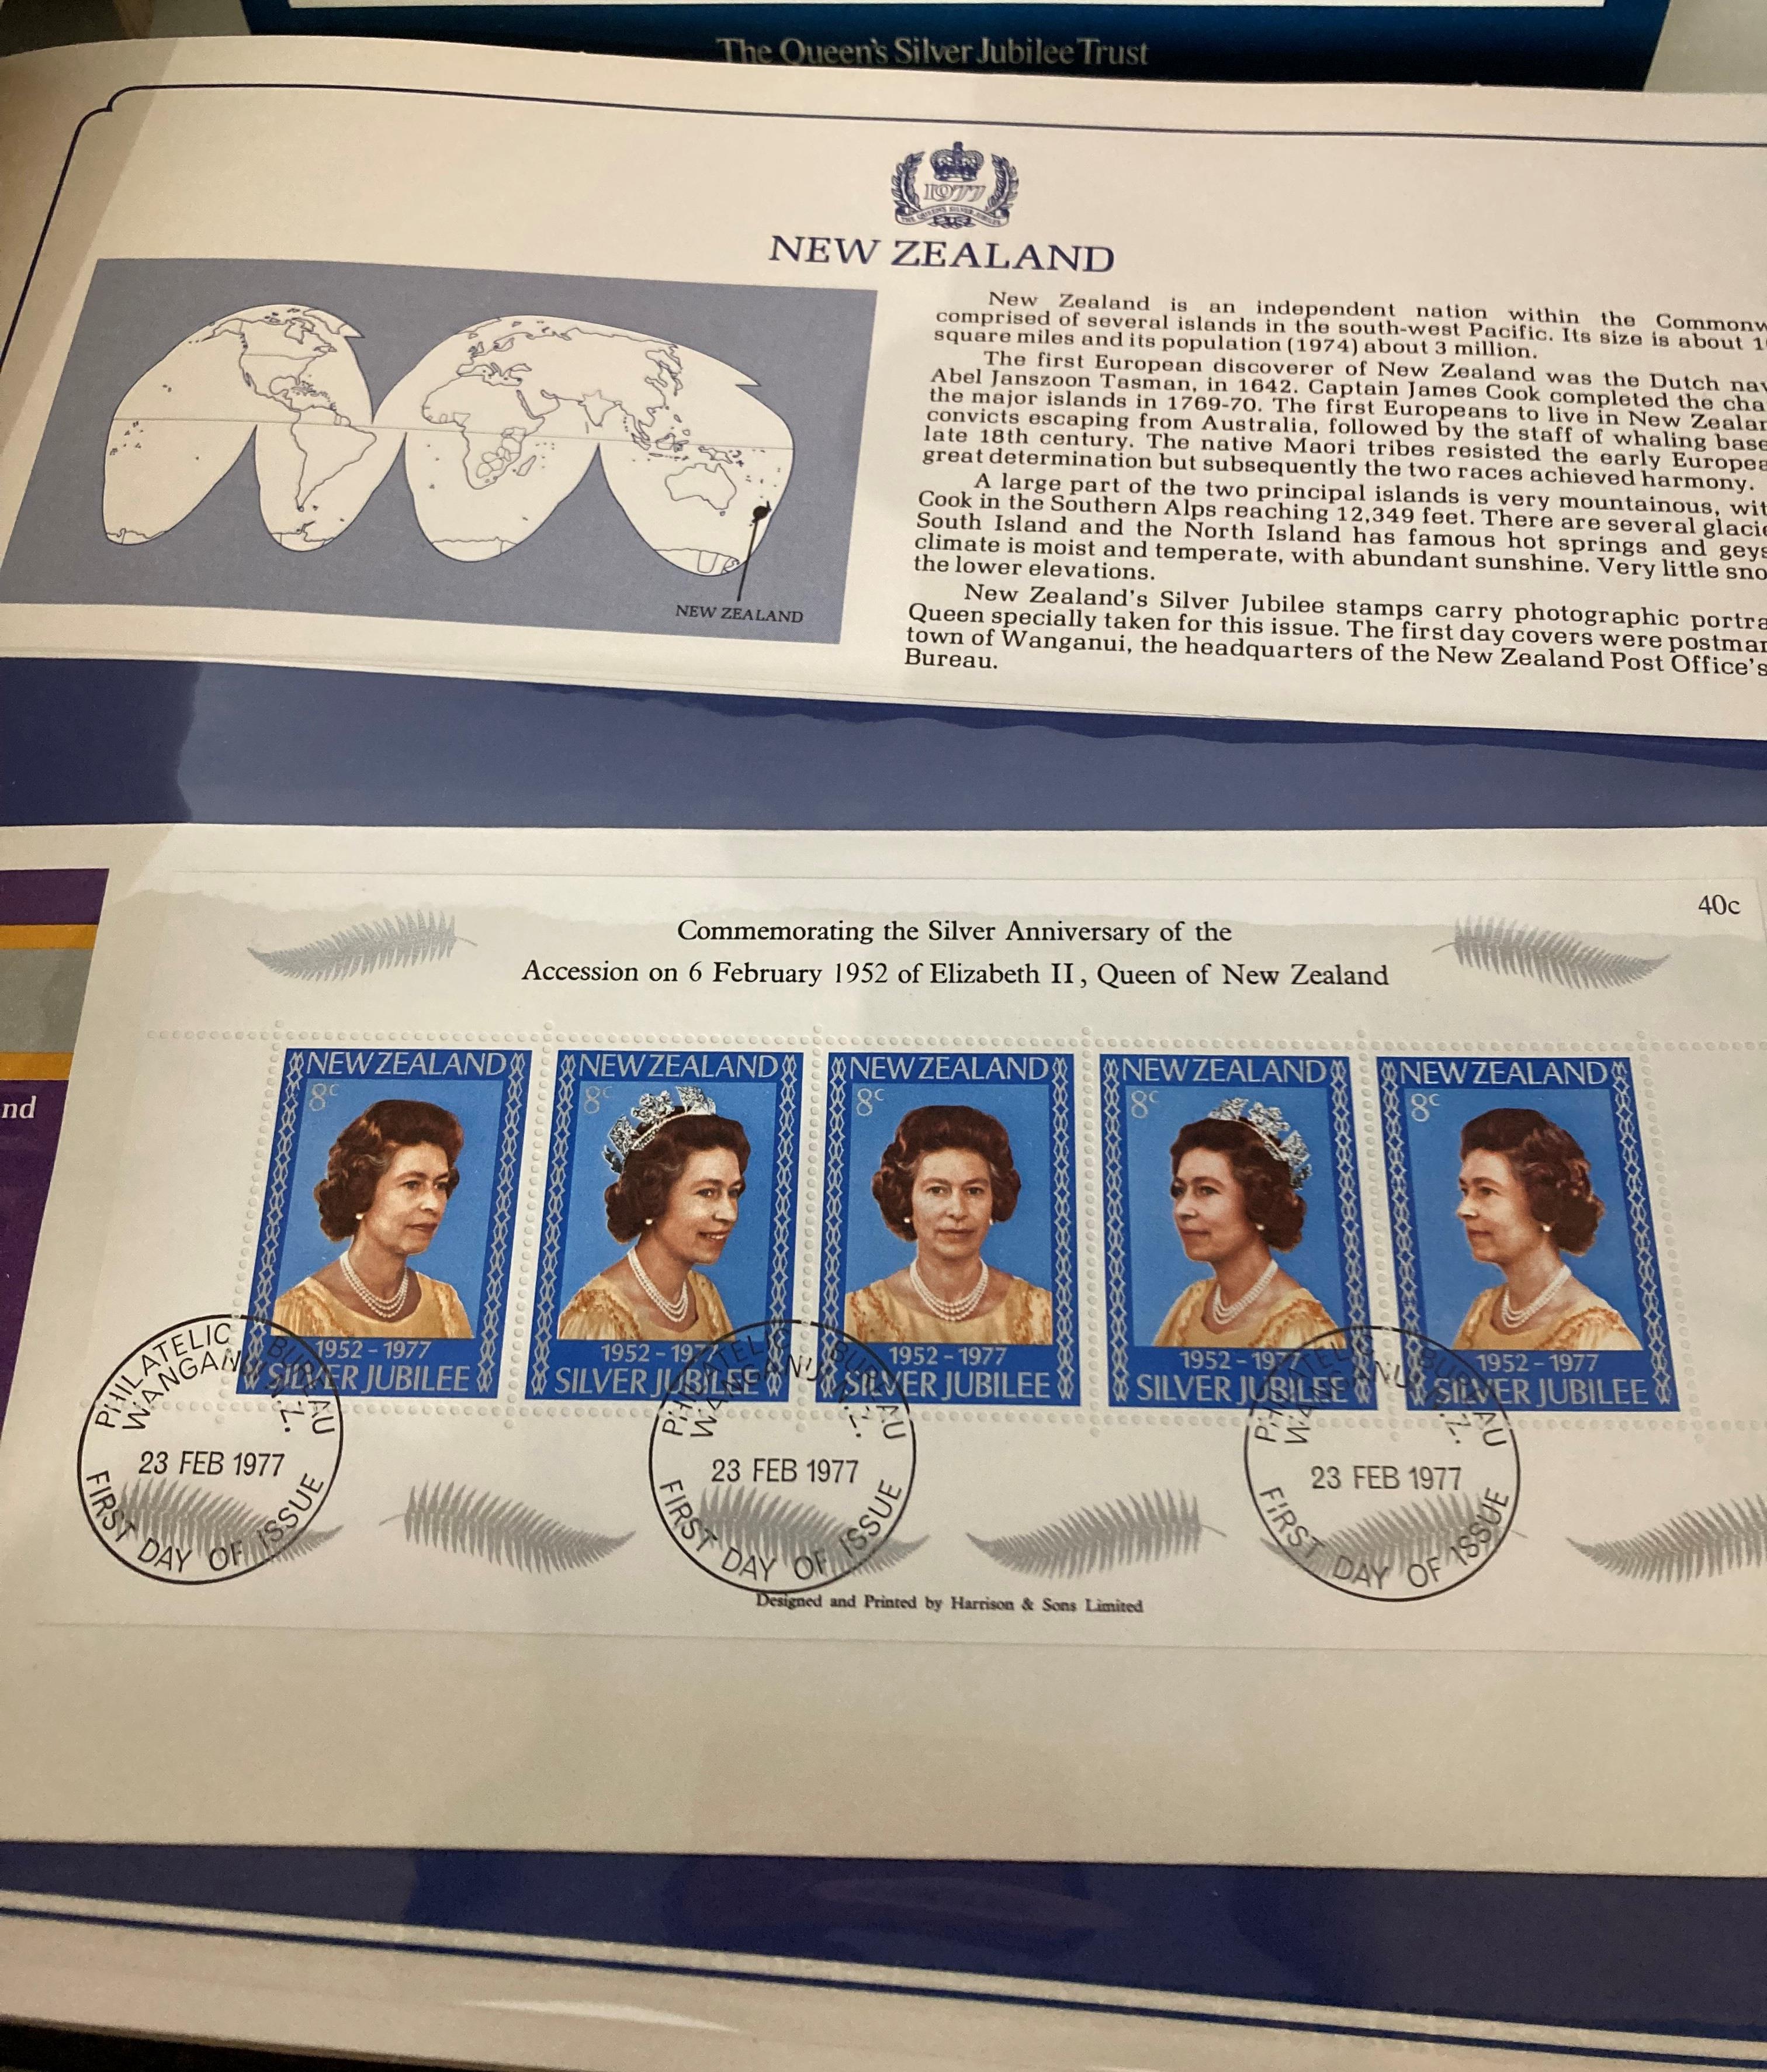 Two Queen Elizabeth II Silver Jubilee First Day Cover Albums by Postal Heritage Society and two - Image 7 of 7